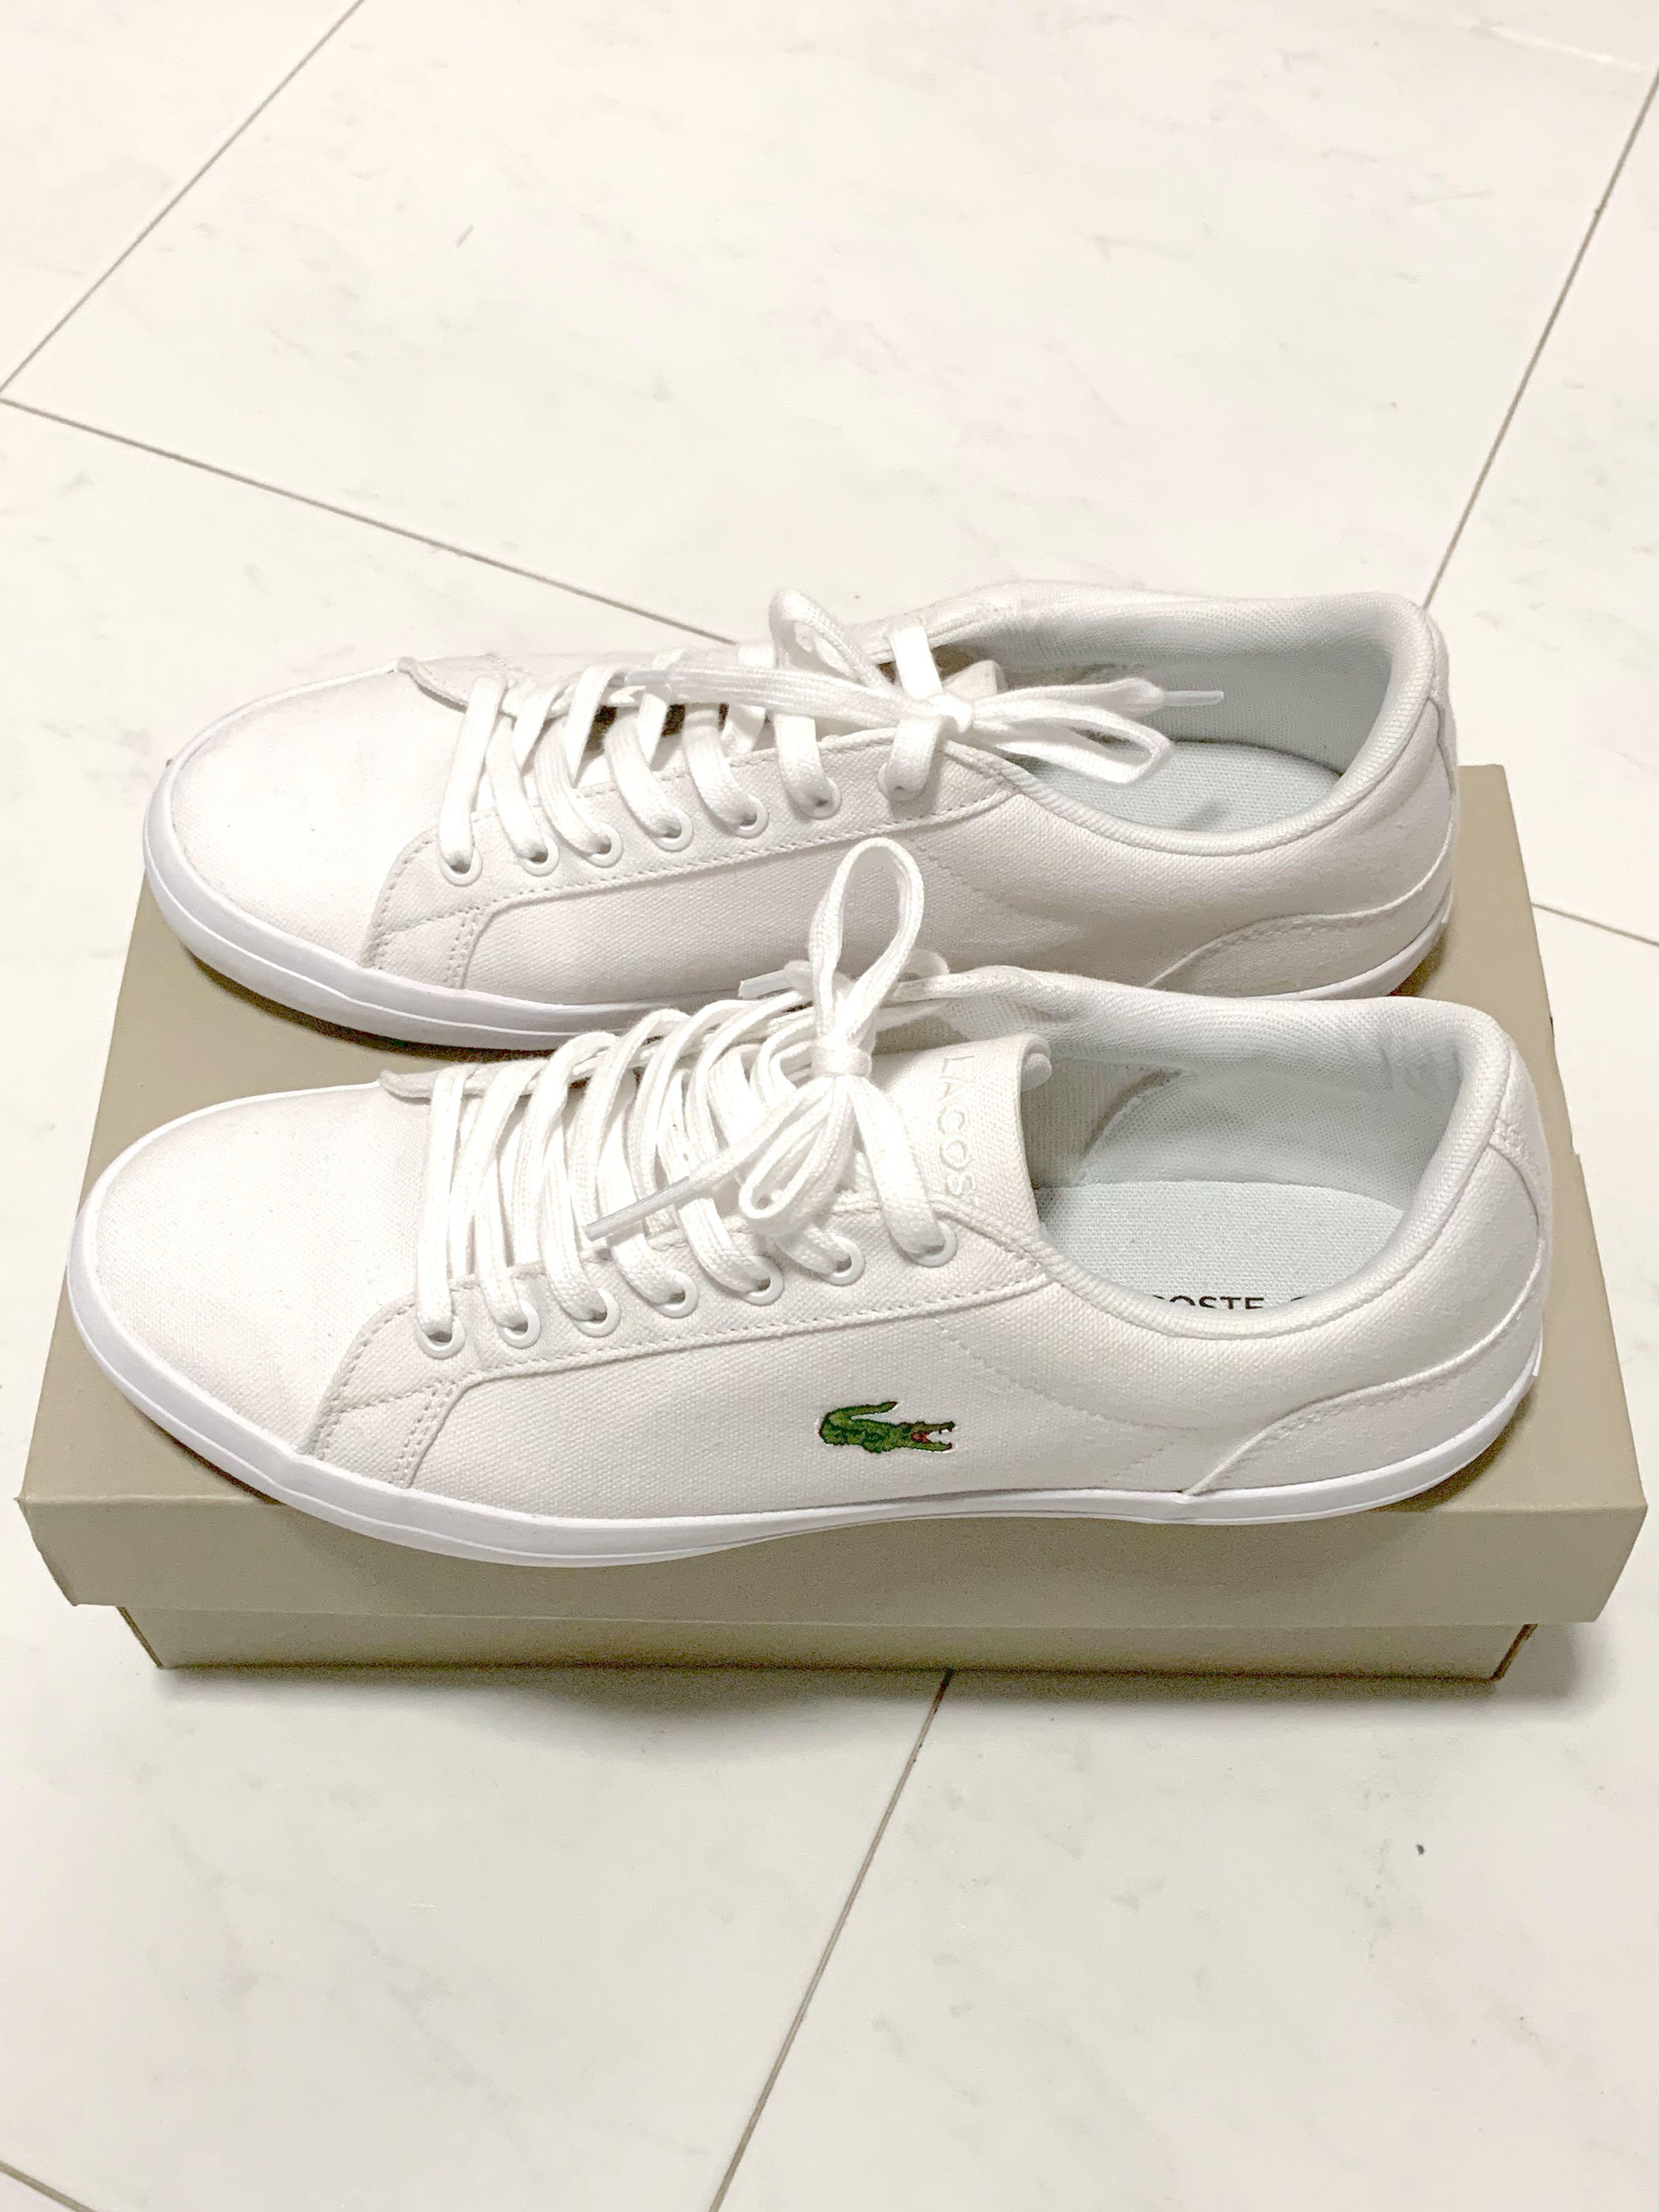 lacoste canvas slip ons